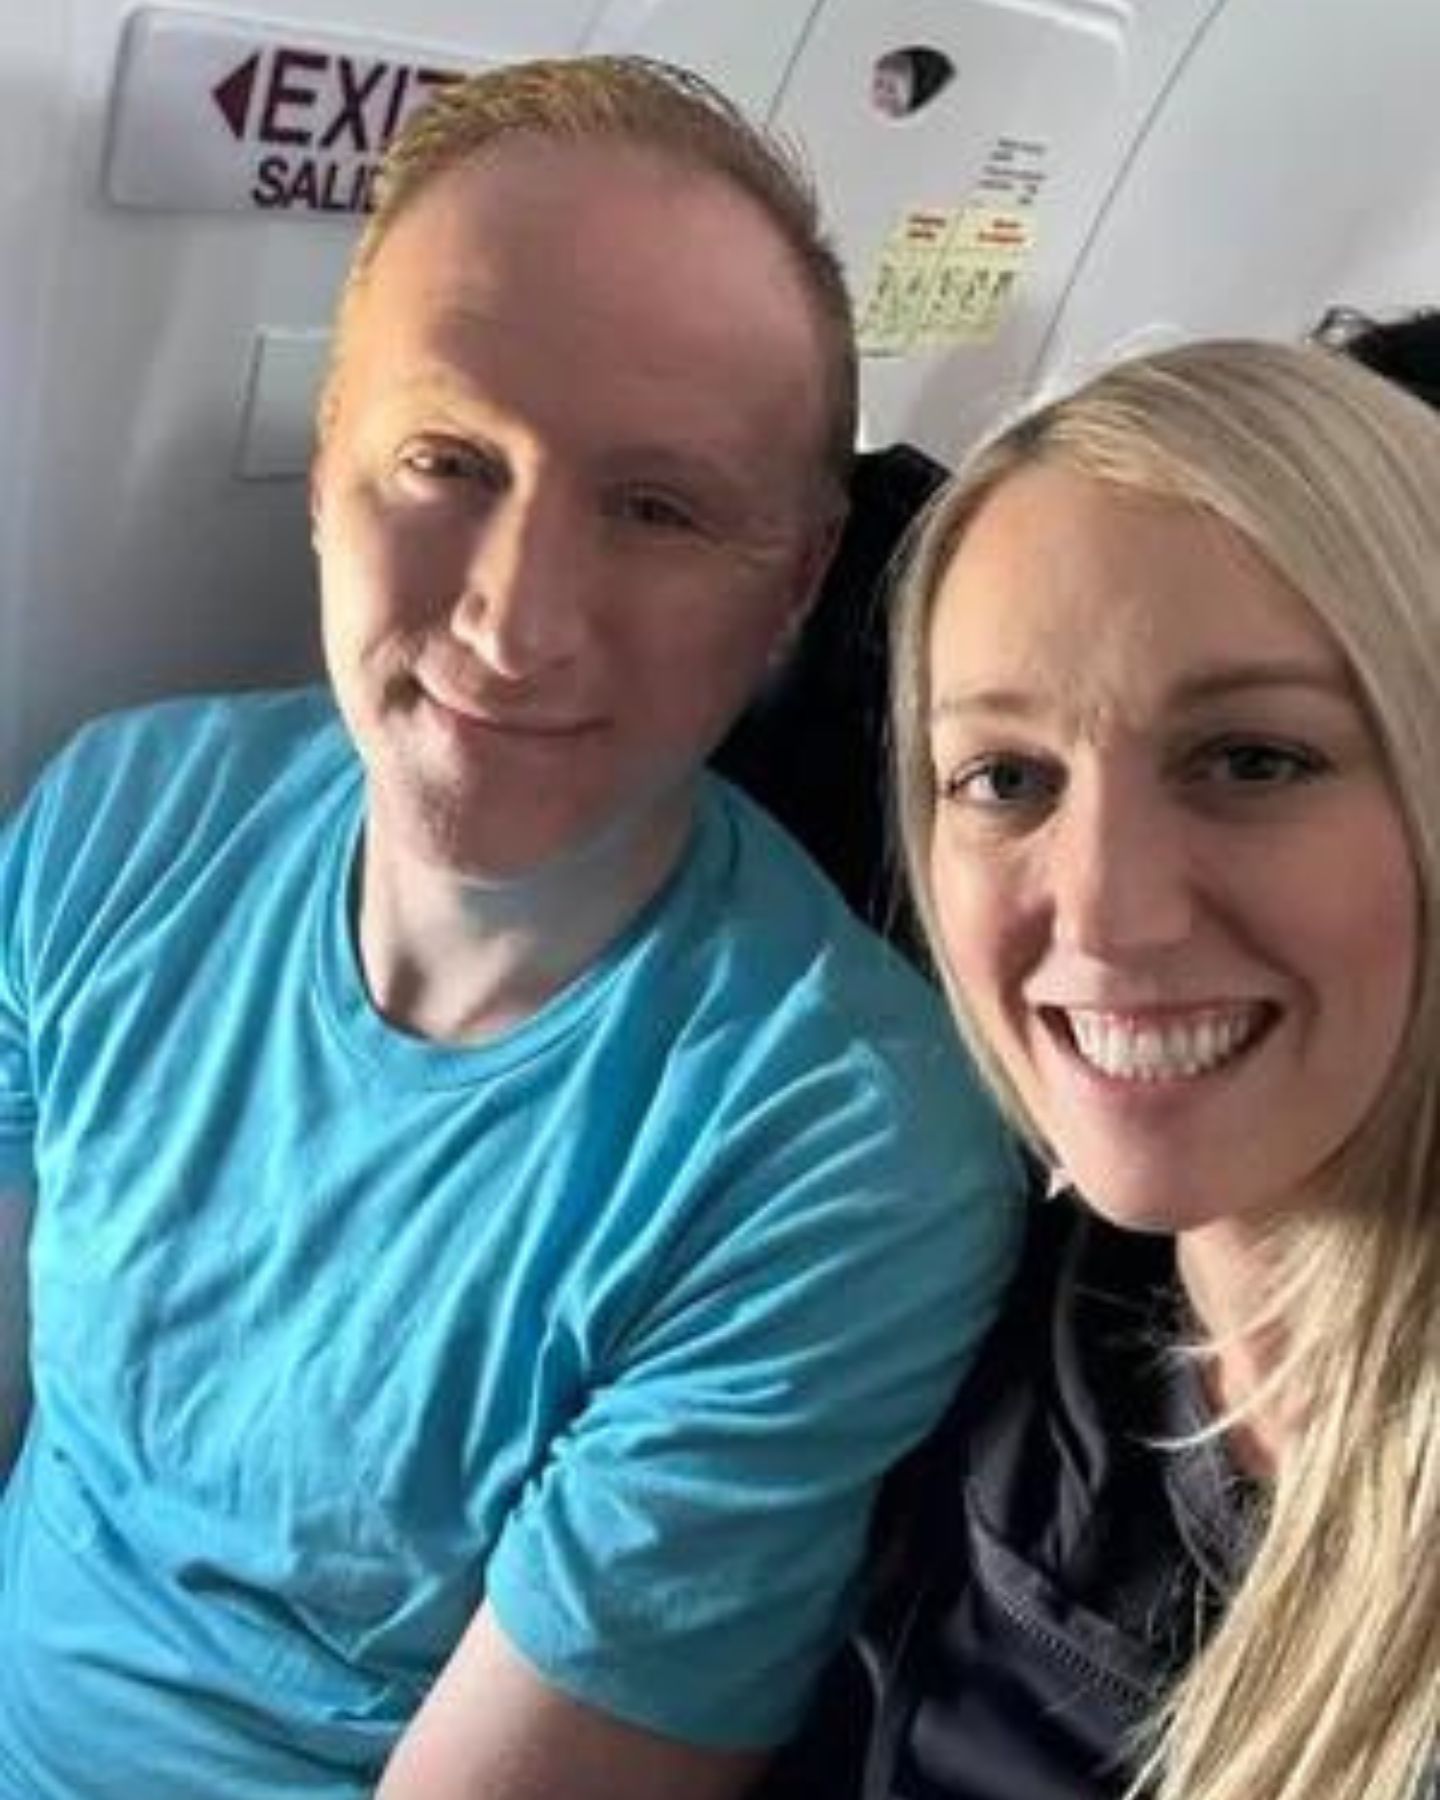 man and woman on a plane